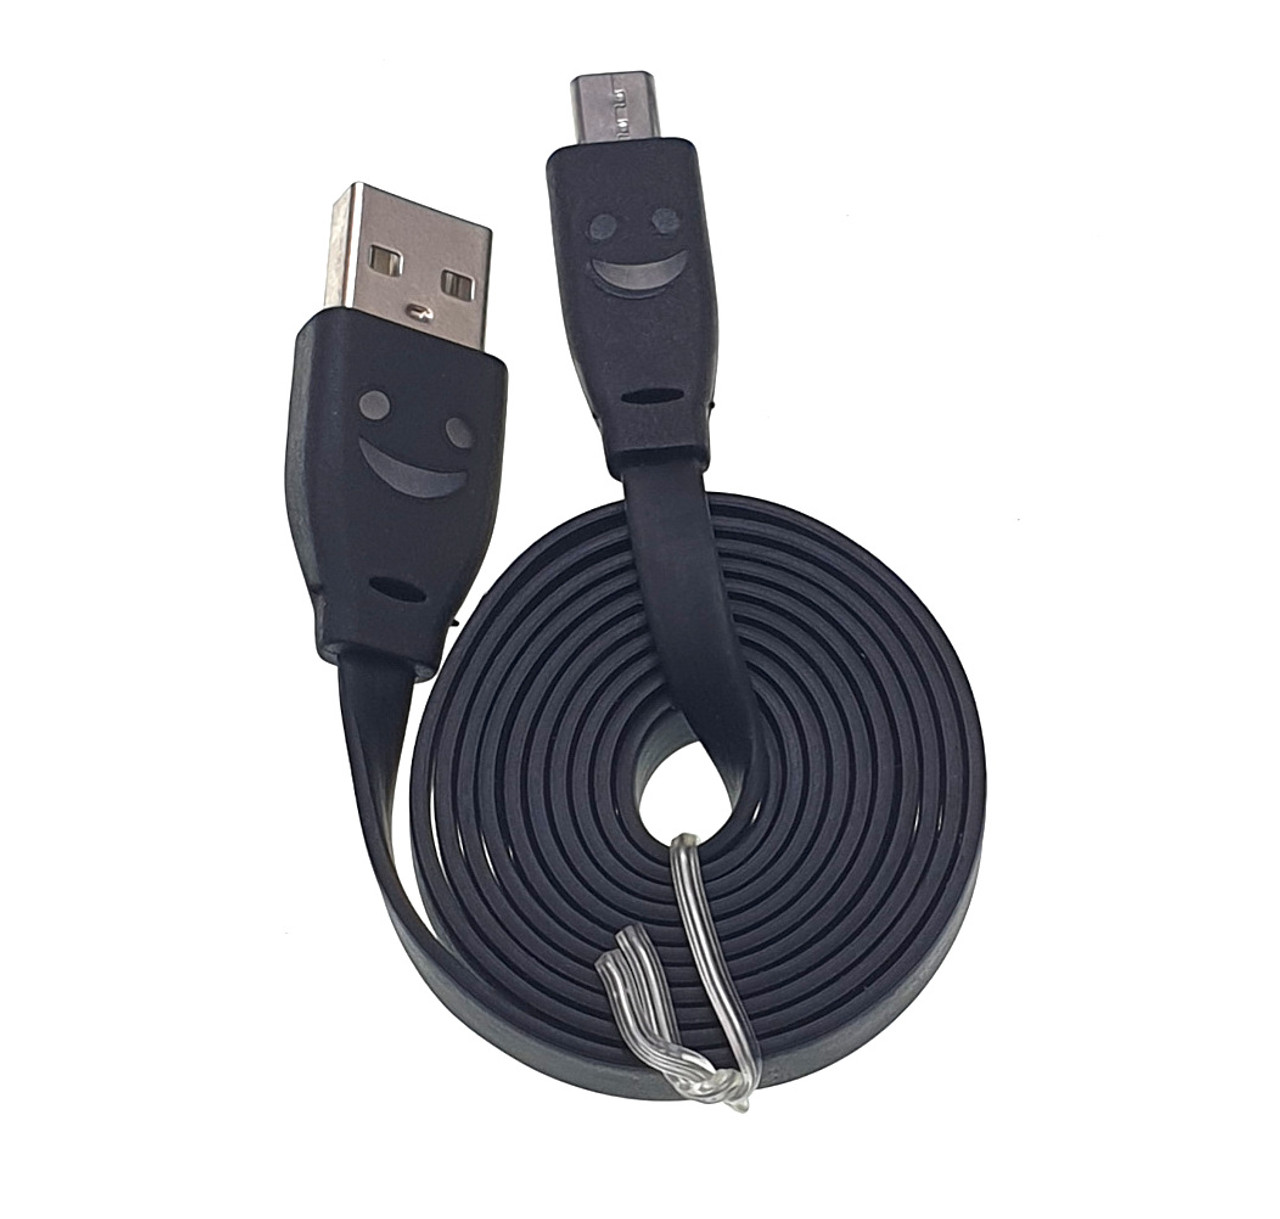 Micro USB Adapter Cable Data Sync Power Supply Charger Cord For Mobile Phone Tablet Power Bank GPS Noodle Flat Smile LED Fashion Design